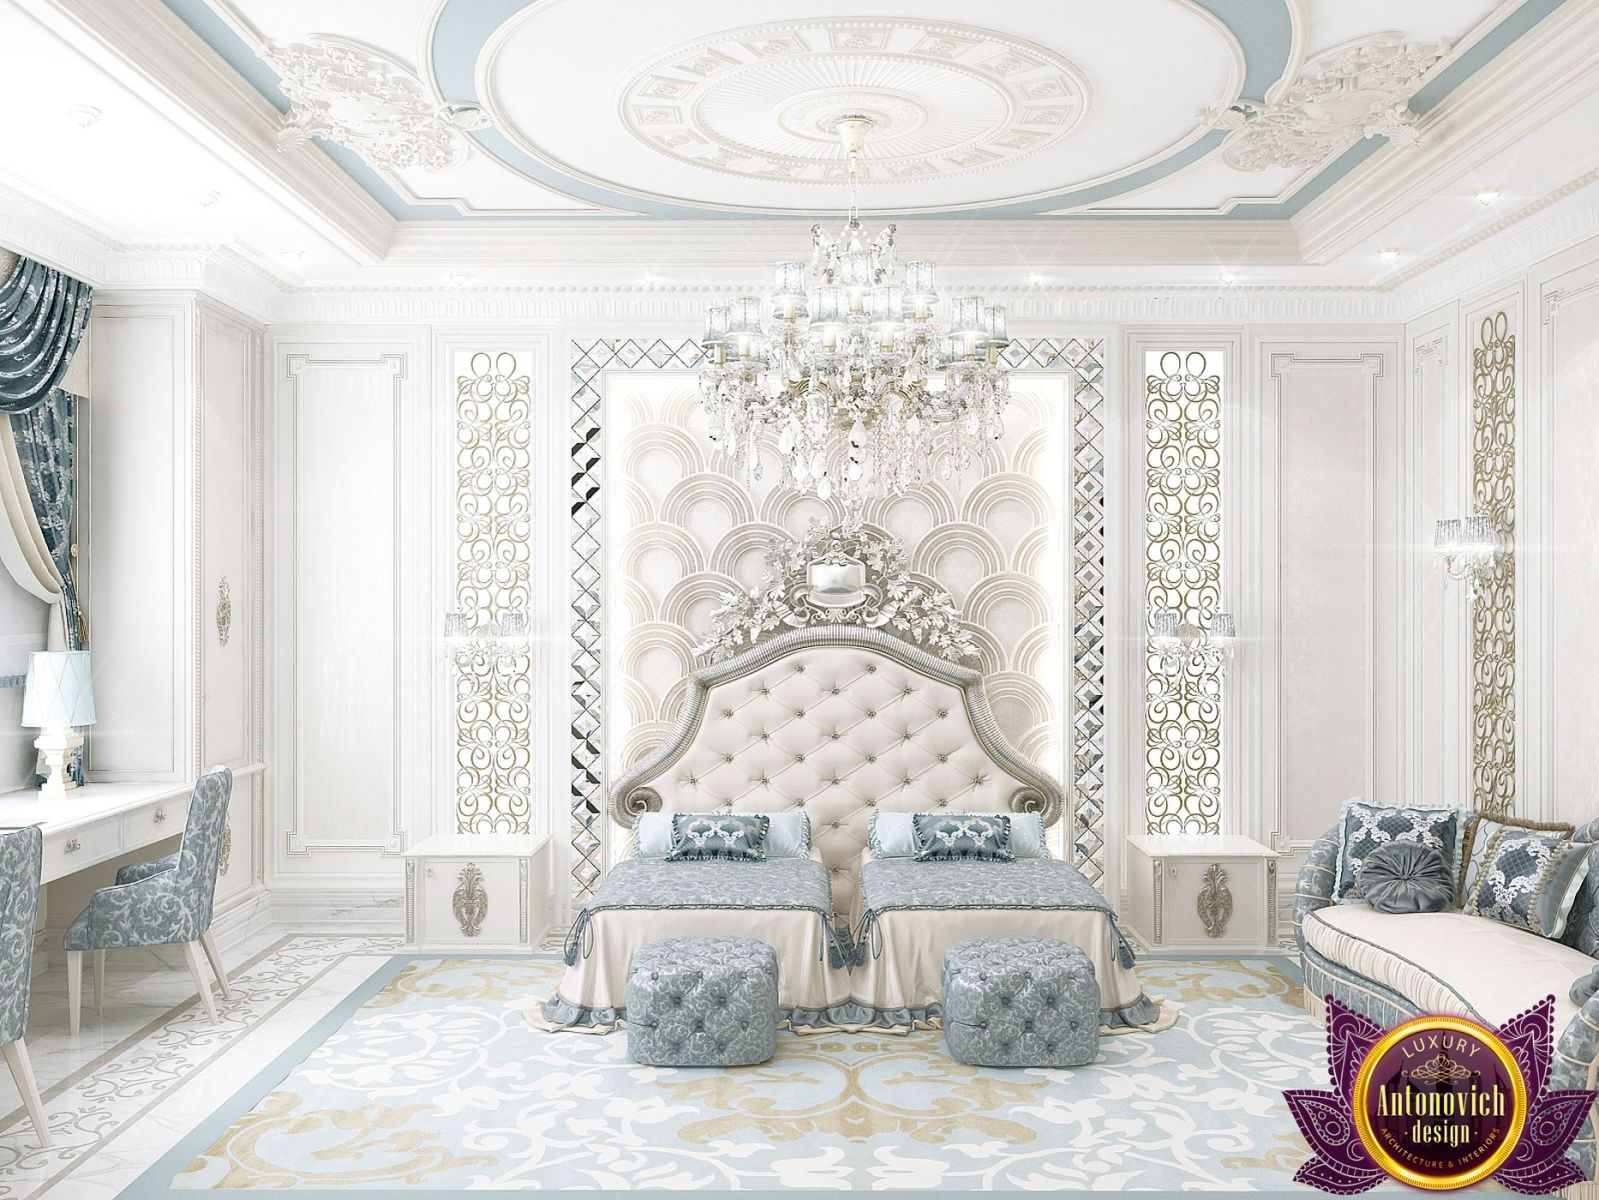 Elegant master bedroom with plush bedding and sophisticated decor